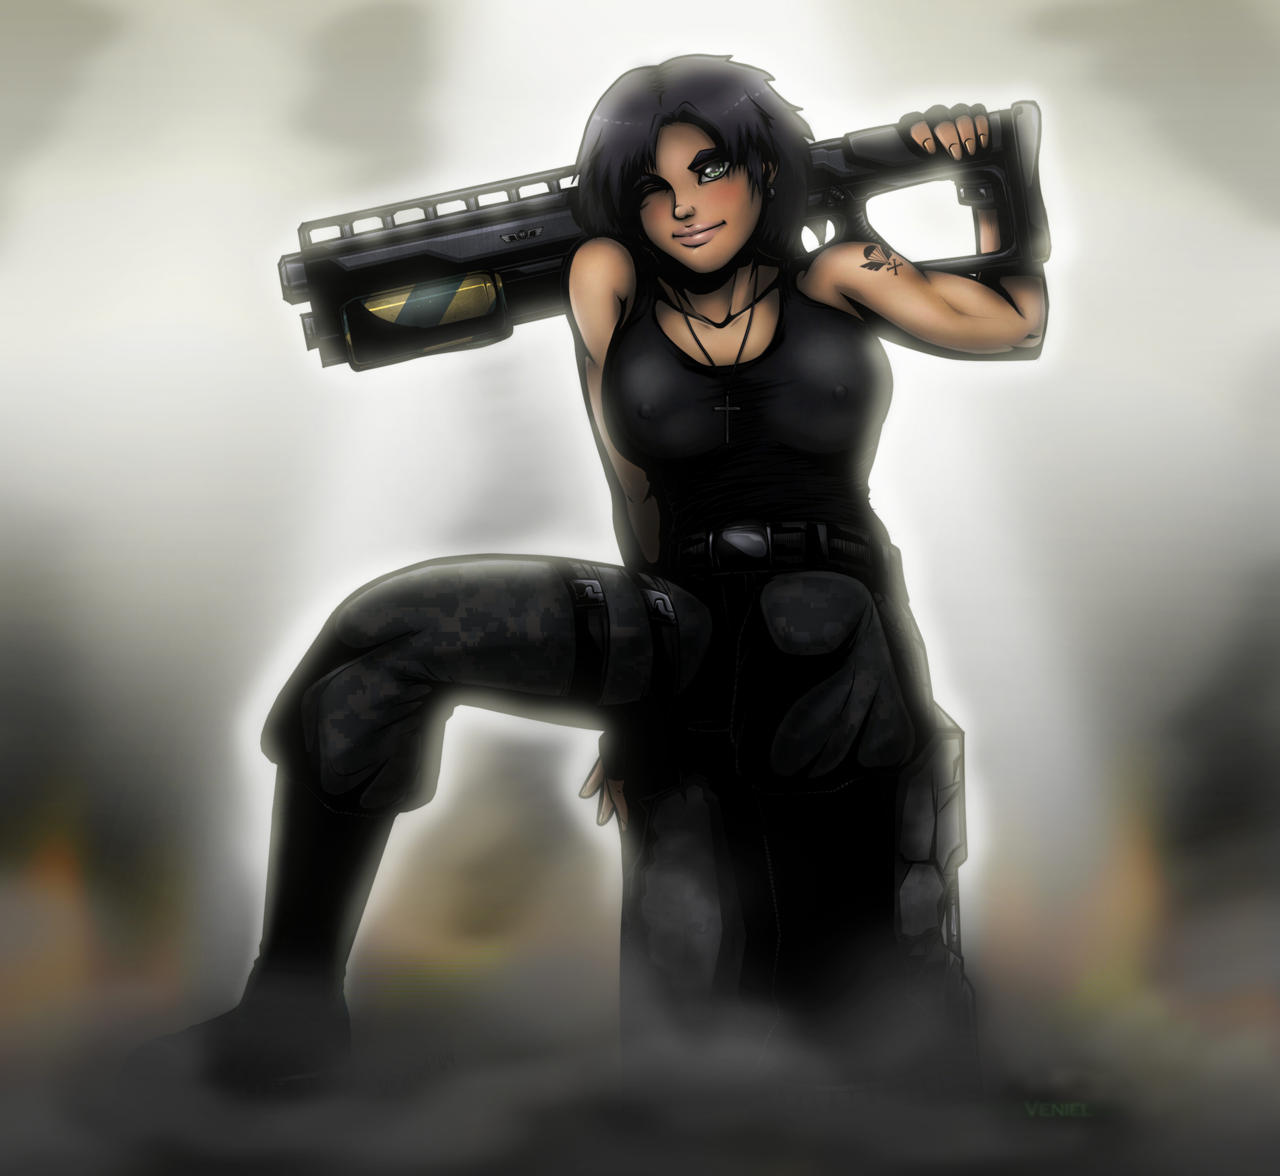 Katerina the napalm girl by Kain-Moerder on DeviantArt